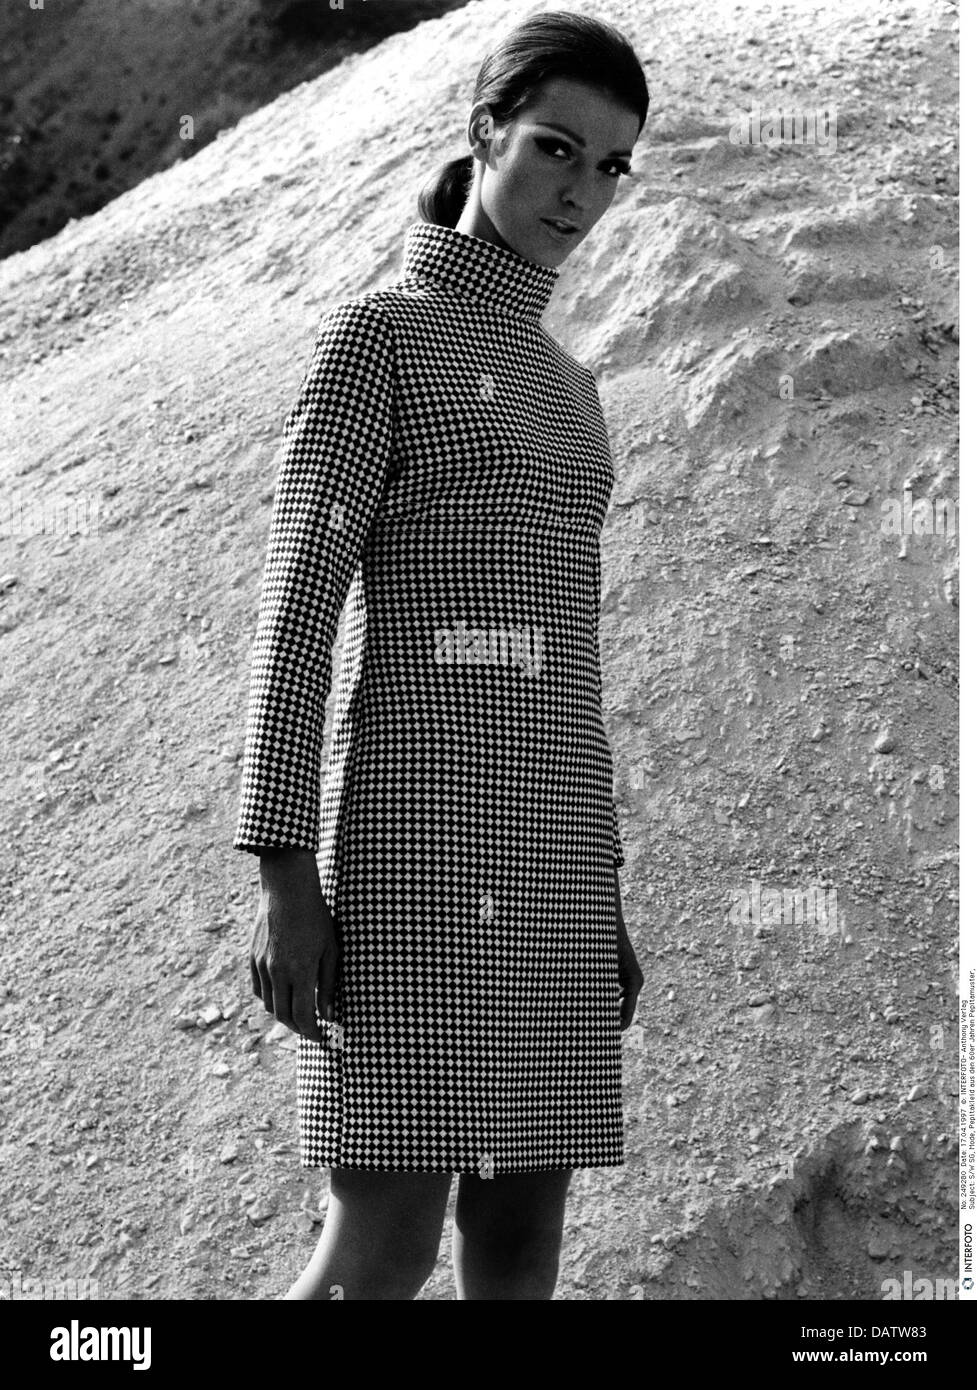 fashion, 1960s, ladies' fashion, woman wearing pepita dress, 1960s, 60s, 20th century, historic, historical, fashion model, mannequin, half length, pattern, patterns, patterned, people, Additional-Rights-Clearences-Not Available Stock Photo